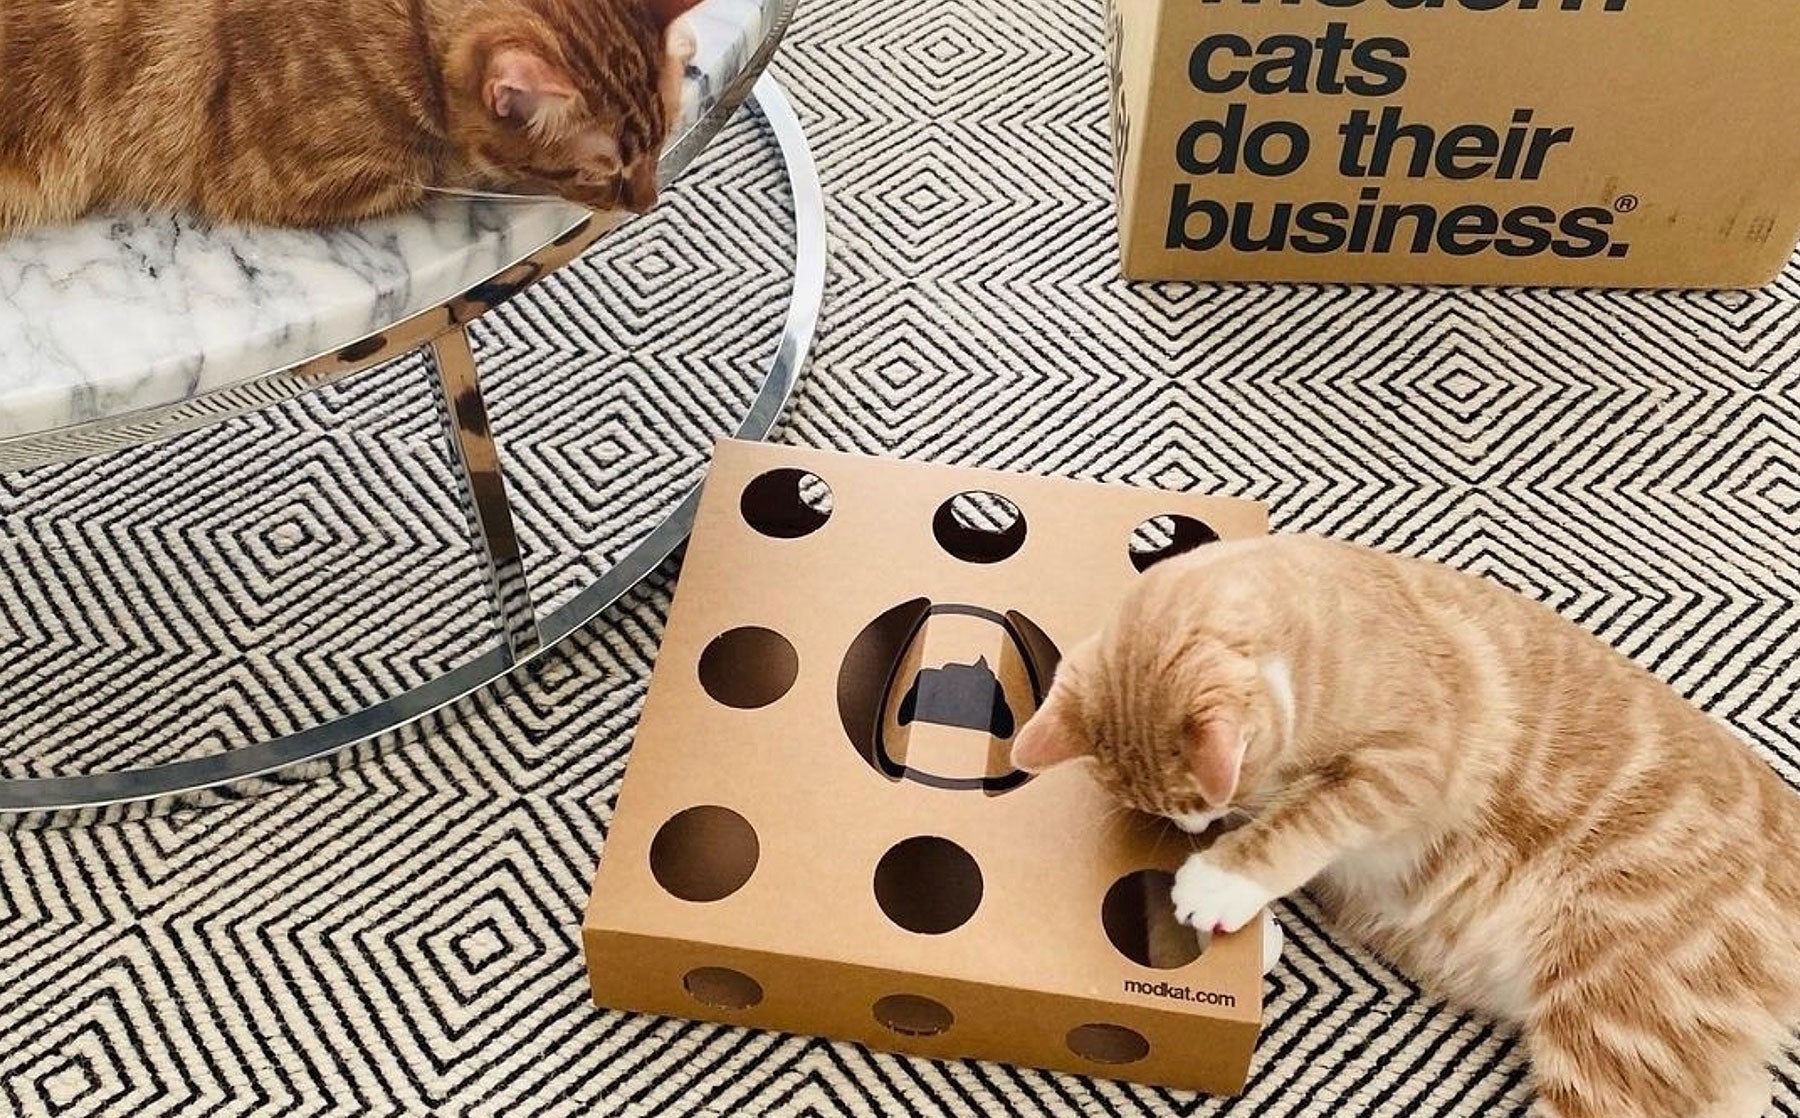 Toys, gadgets, and games for cats.